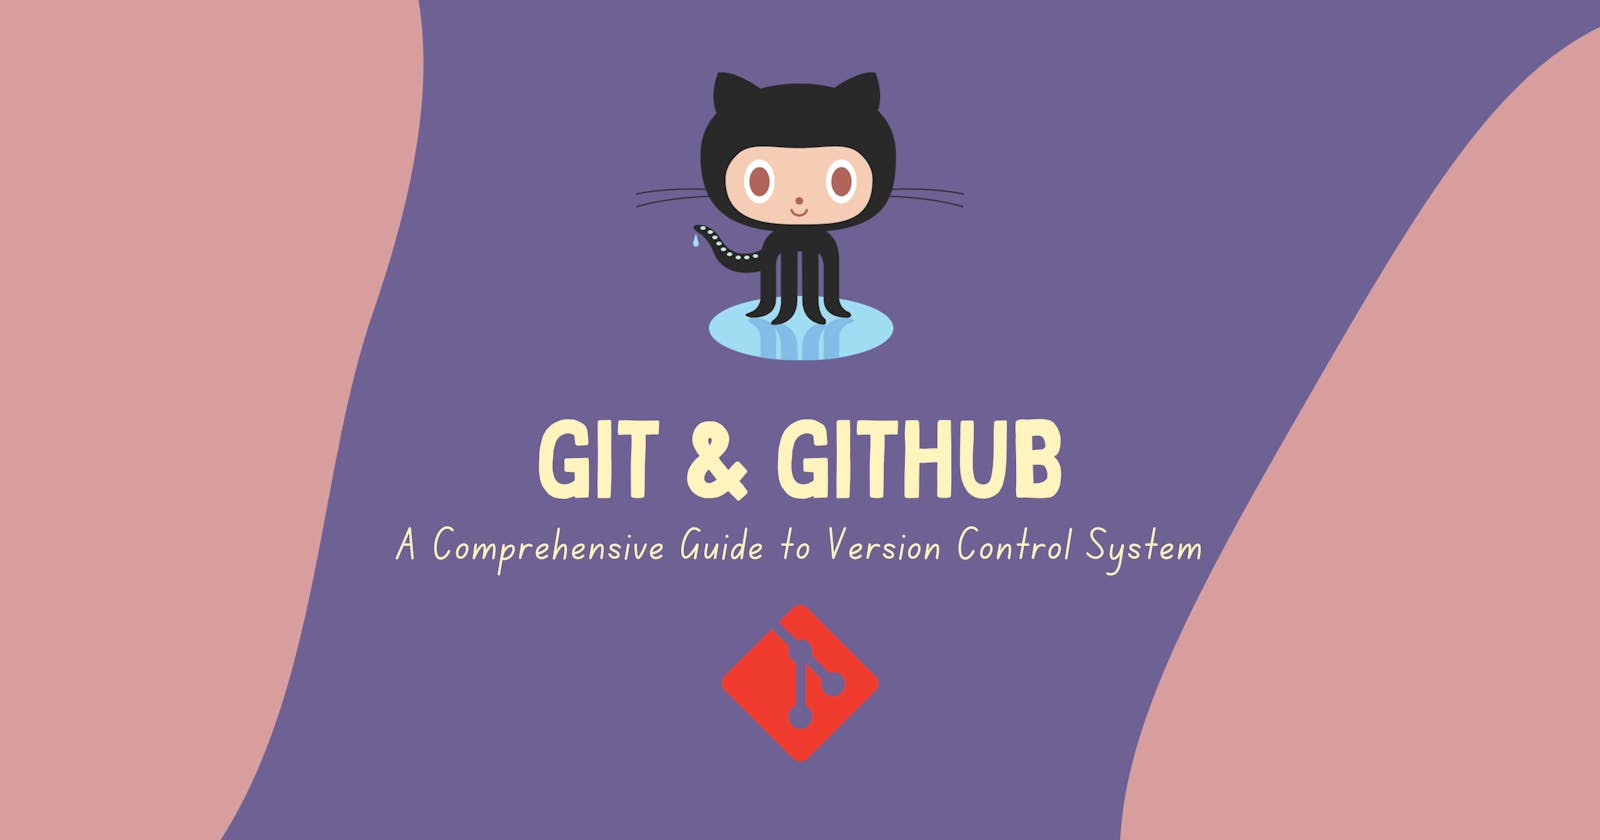 Git and GitHub: A Comprehensive Guide about Version Control System